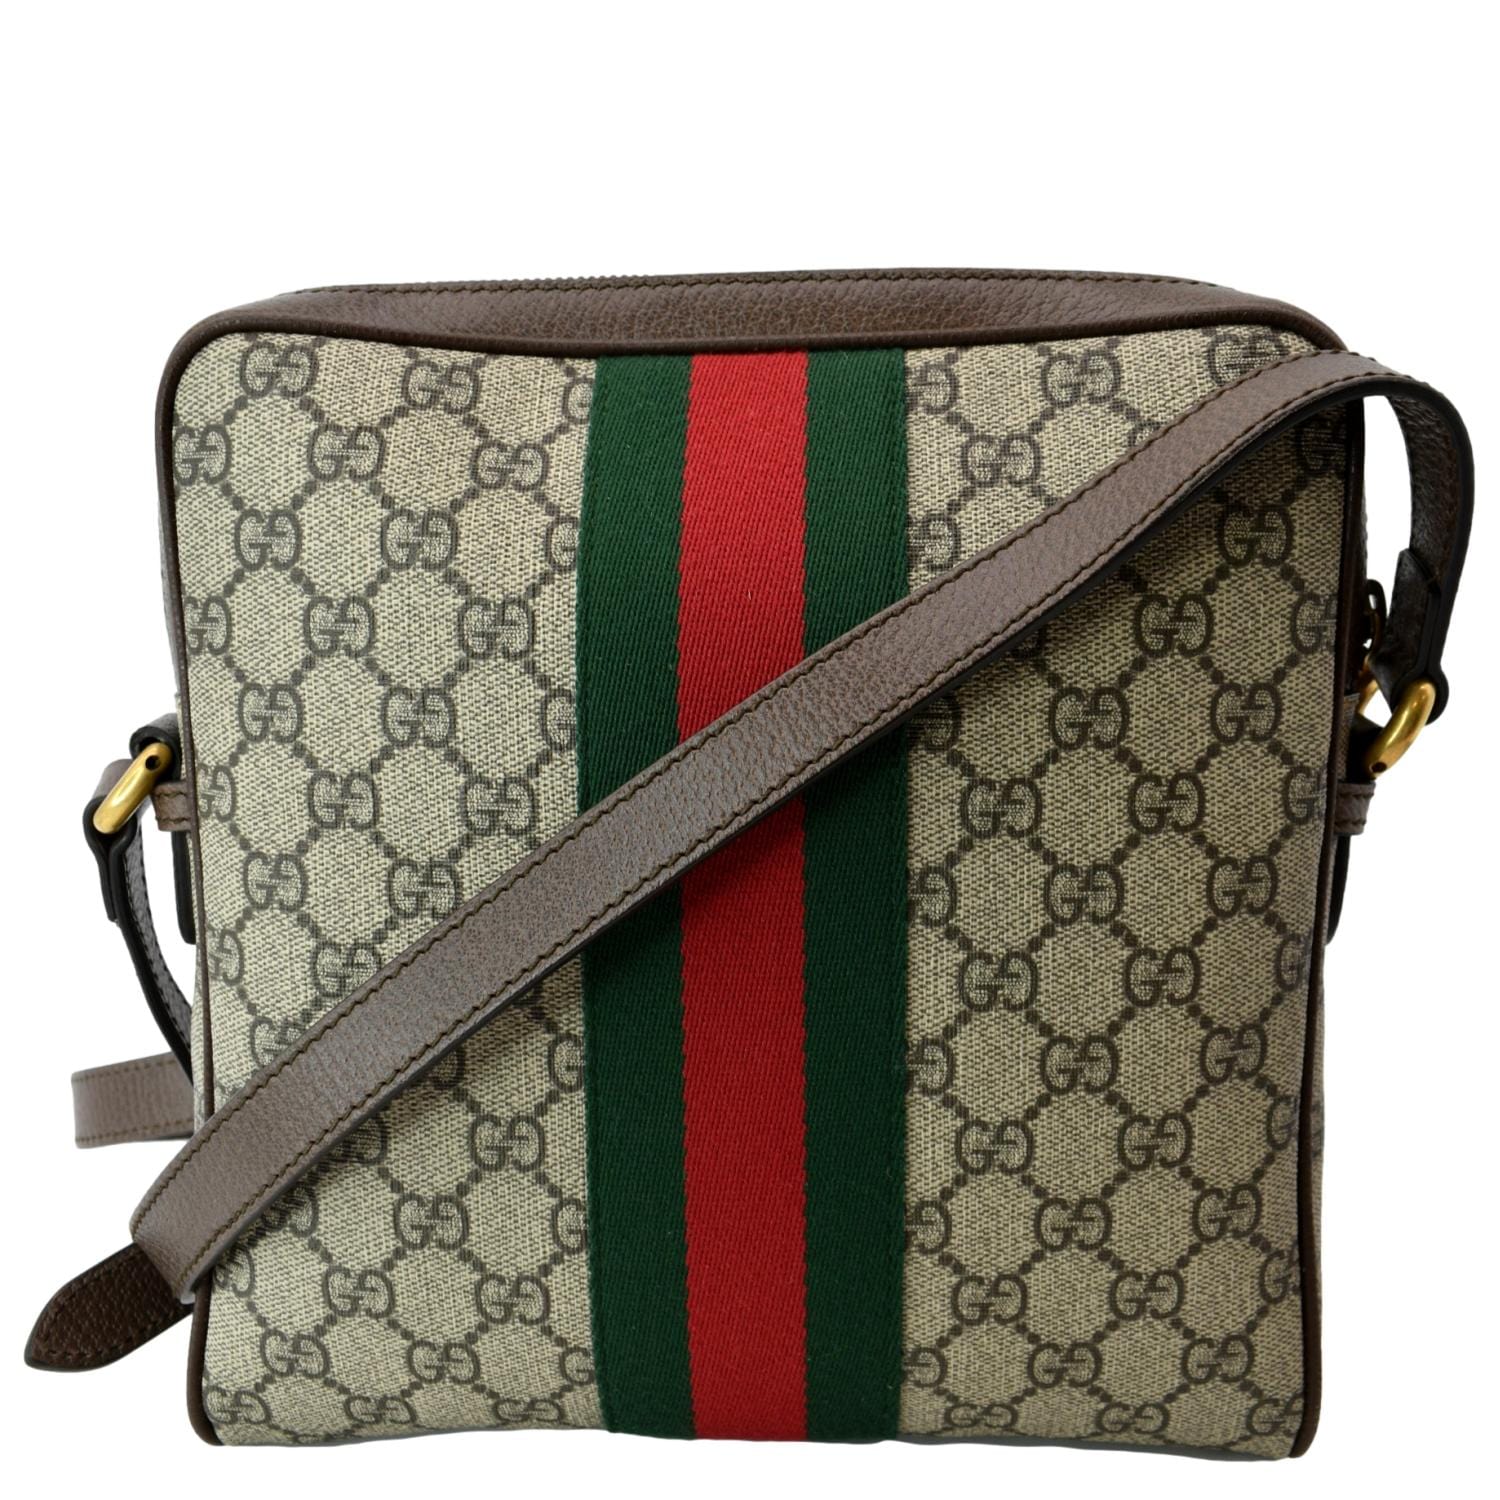 Gucci Ophidia Small GG Canvas Messenger Bag Beige 547926